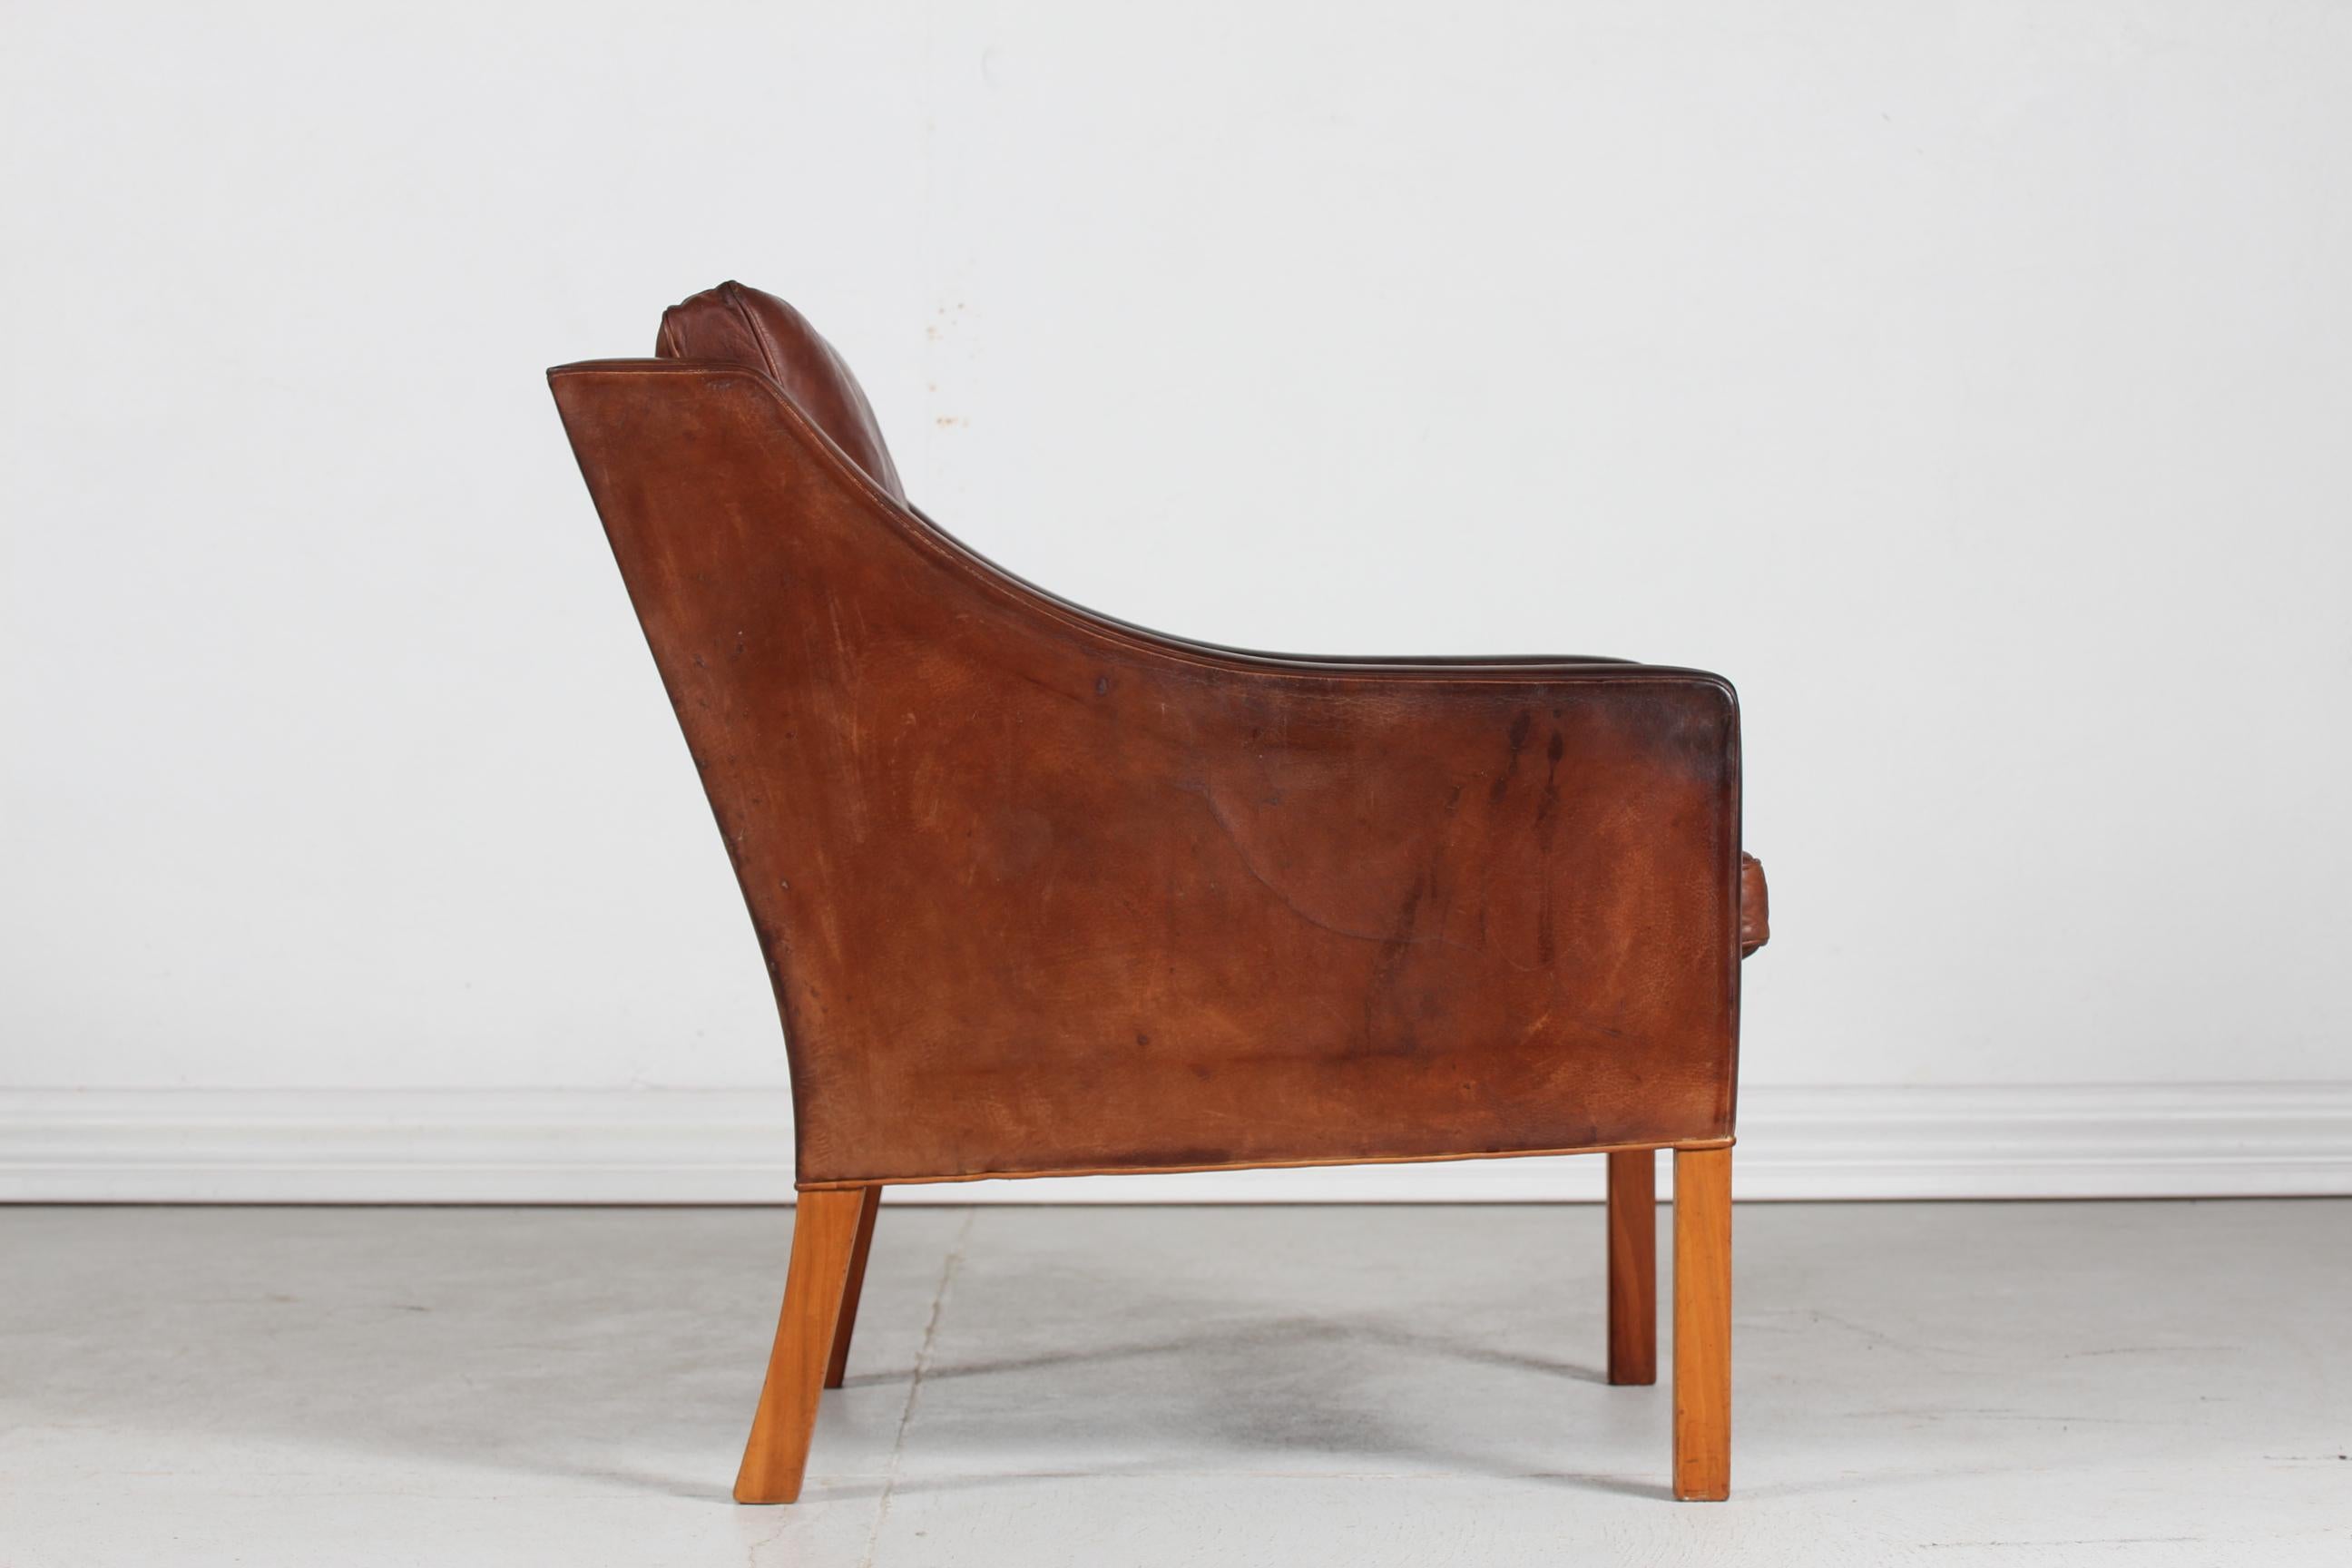 Danish vintage Børge Mogensen (1914-1972) easy chair/ lounge chair model no. 2207 upholstered with the original cognac colored leather with great patina
The legs are mede of solid walnut.

The chair is made by Fredericia Stolefabrik in the 1970s